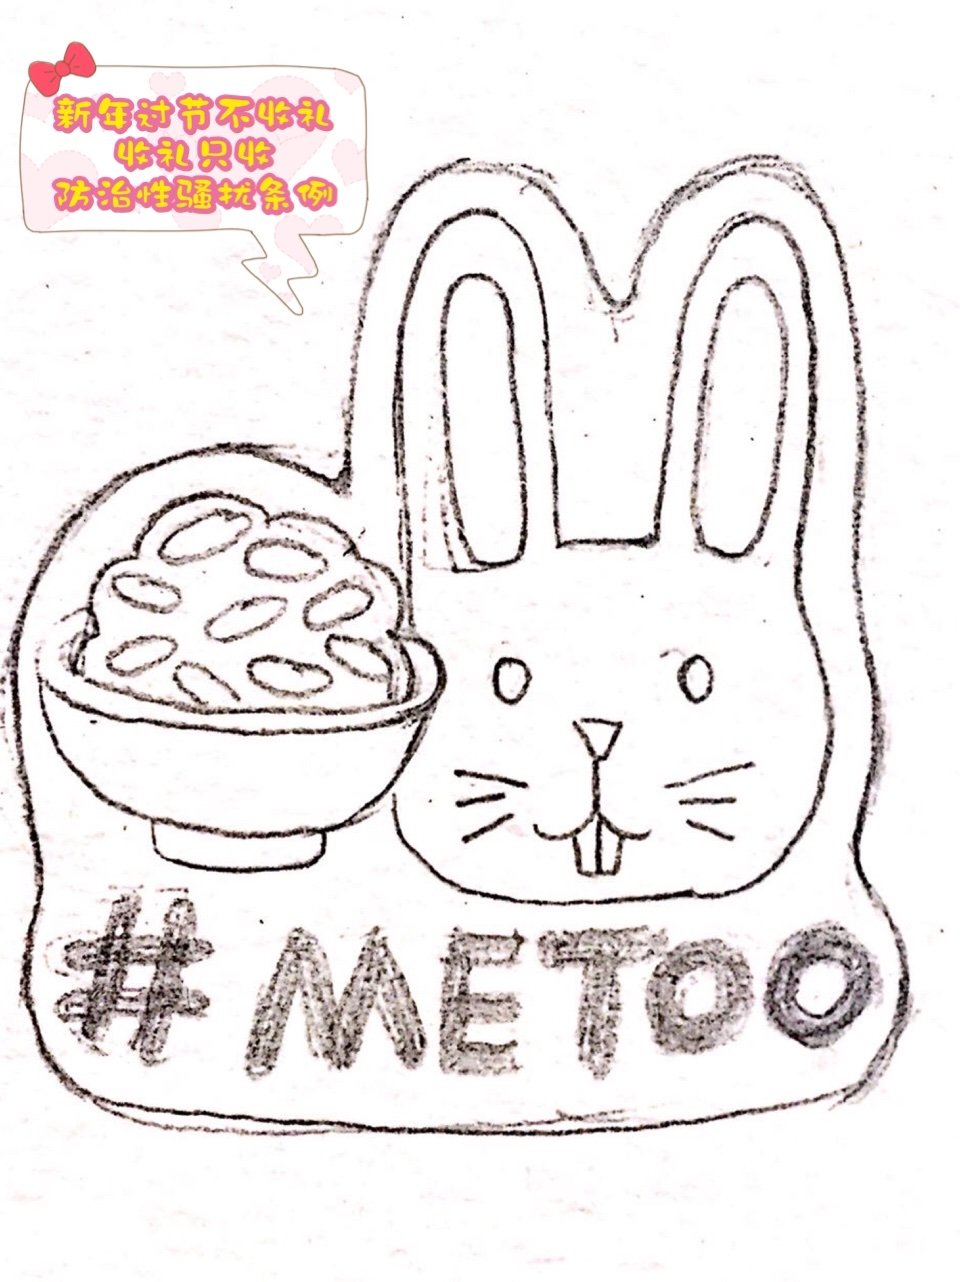 #MetooinChina #米兔在中国 #Ricebunny 🍚🐰🍚🐰🍚 Chinese feminist striving for Anti-sexual Harassment movement and gender equality.#米兔 #Metoo